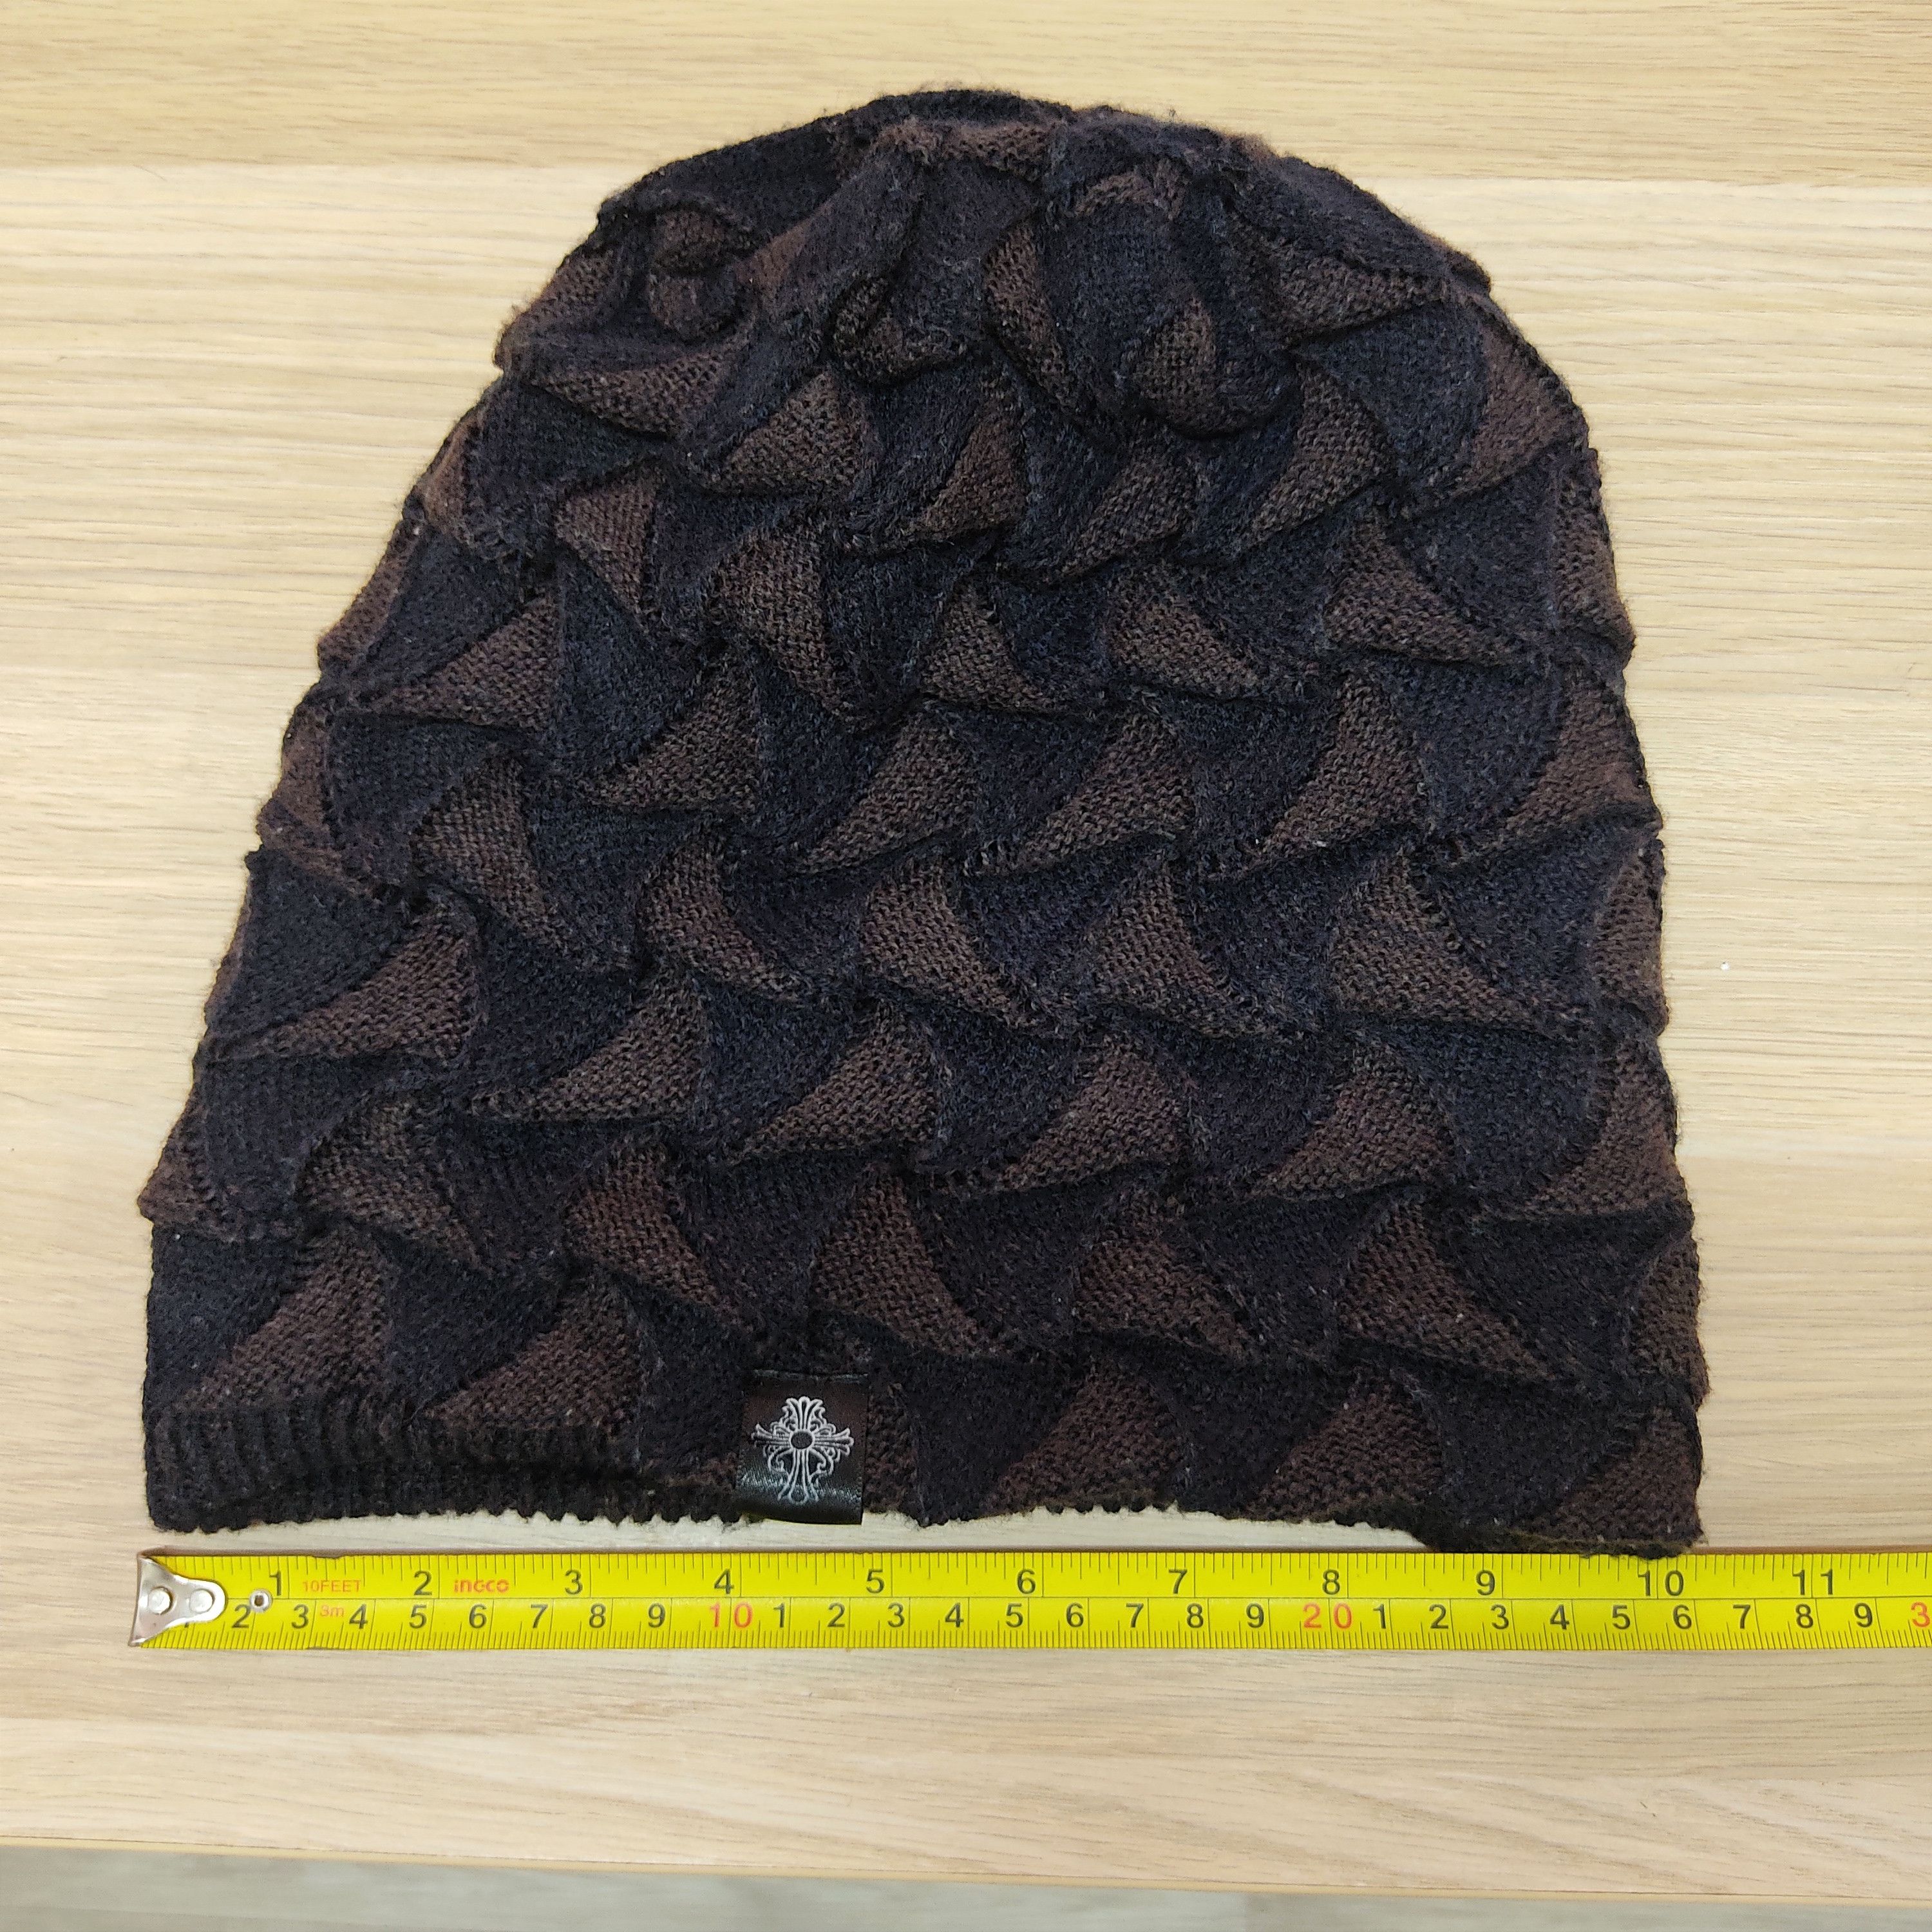 Rare - Reversible Knitted Chrome Hearts Inspired Pattern Beanie - 8